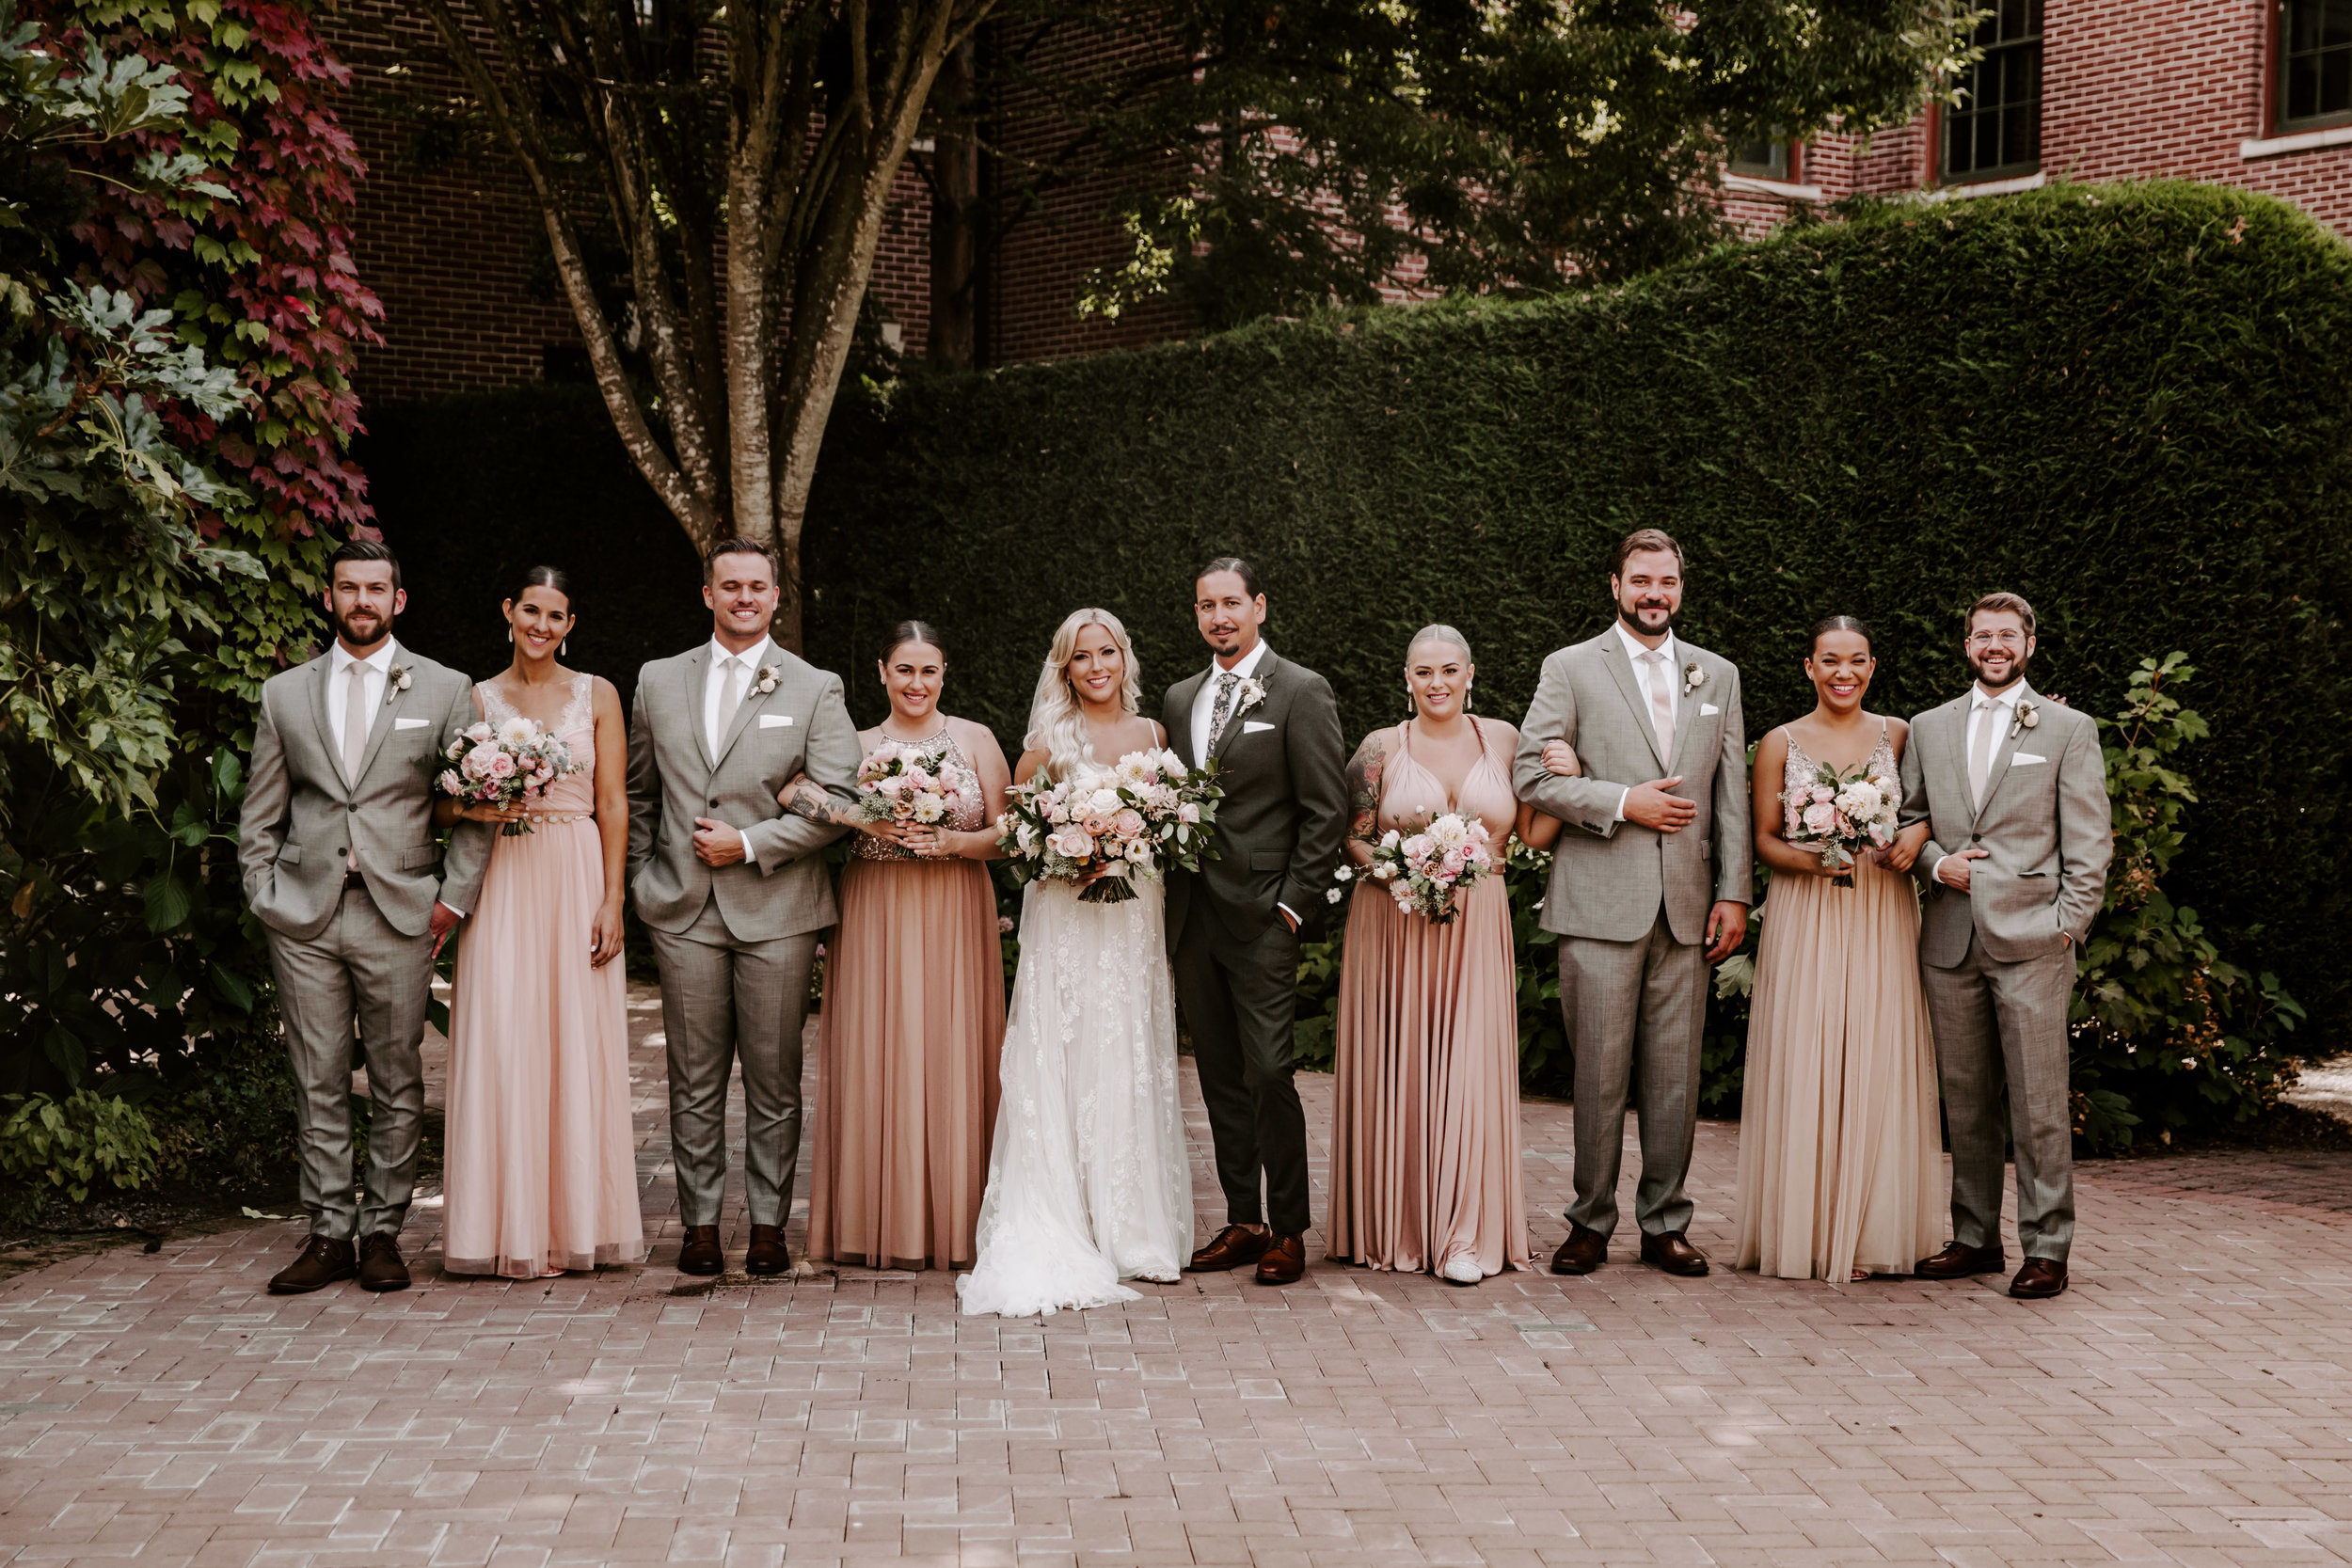 Rustic Bloom Photography | Bridal Party Inspiration | McMenamins Grand Lodge